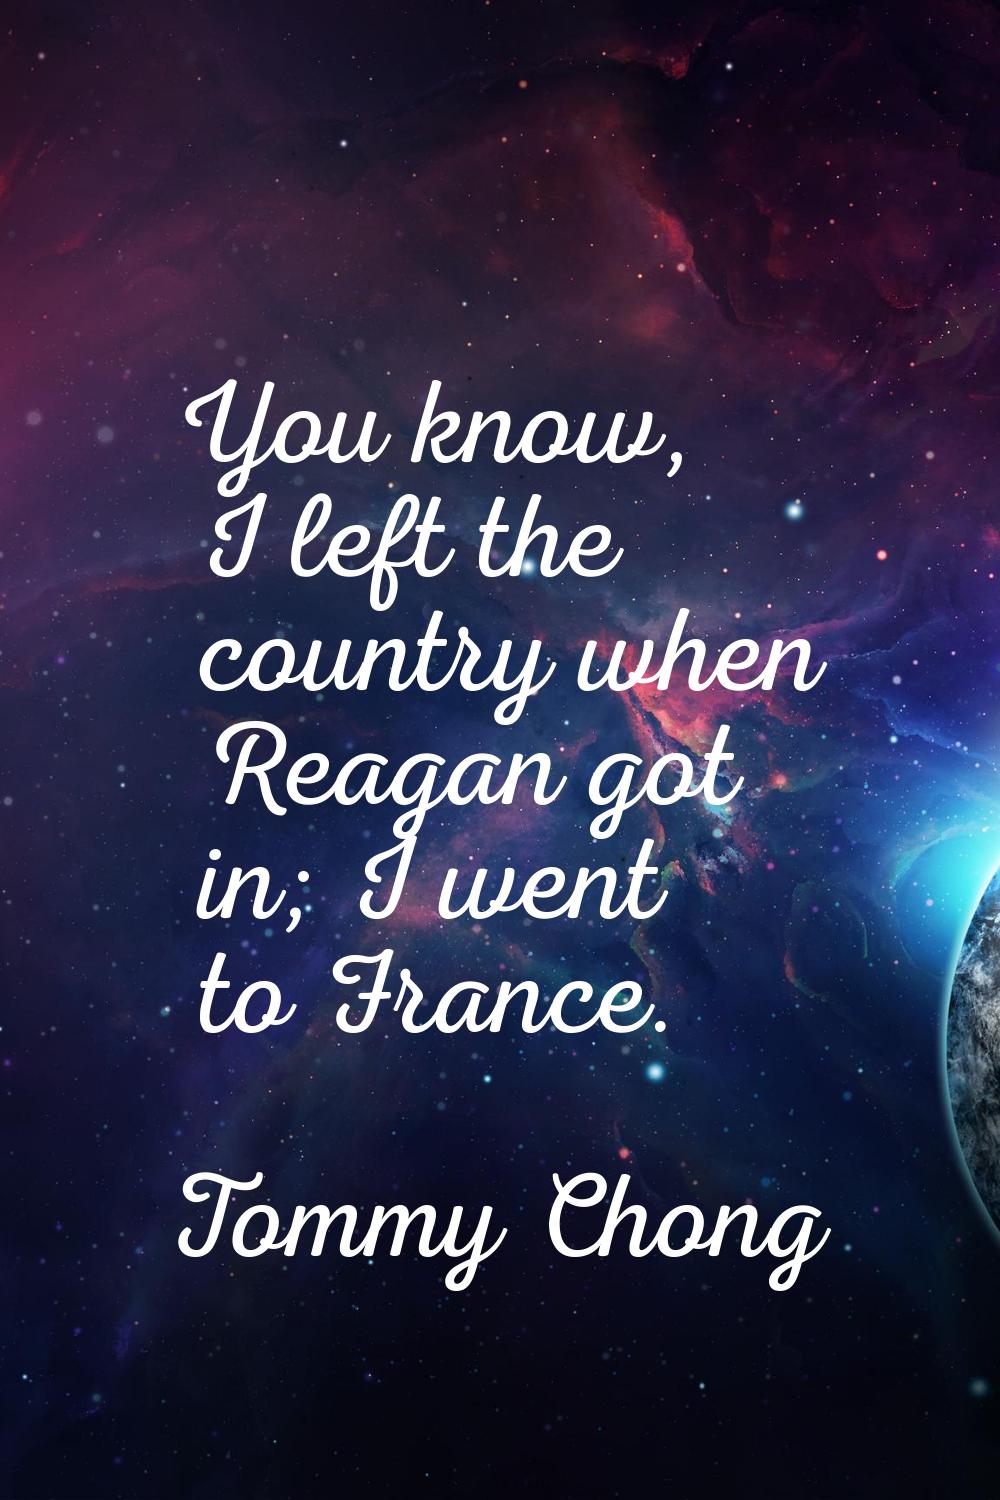 You know, I left the country when Reagan got in; I went to France.